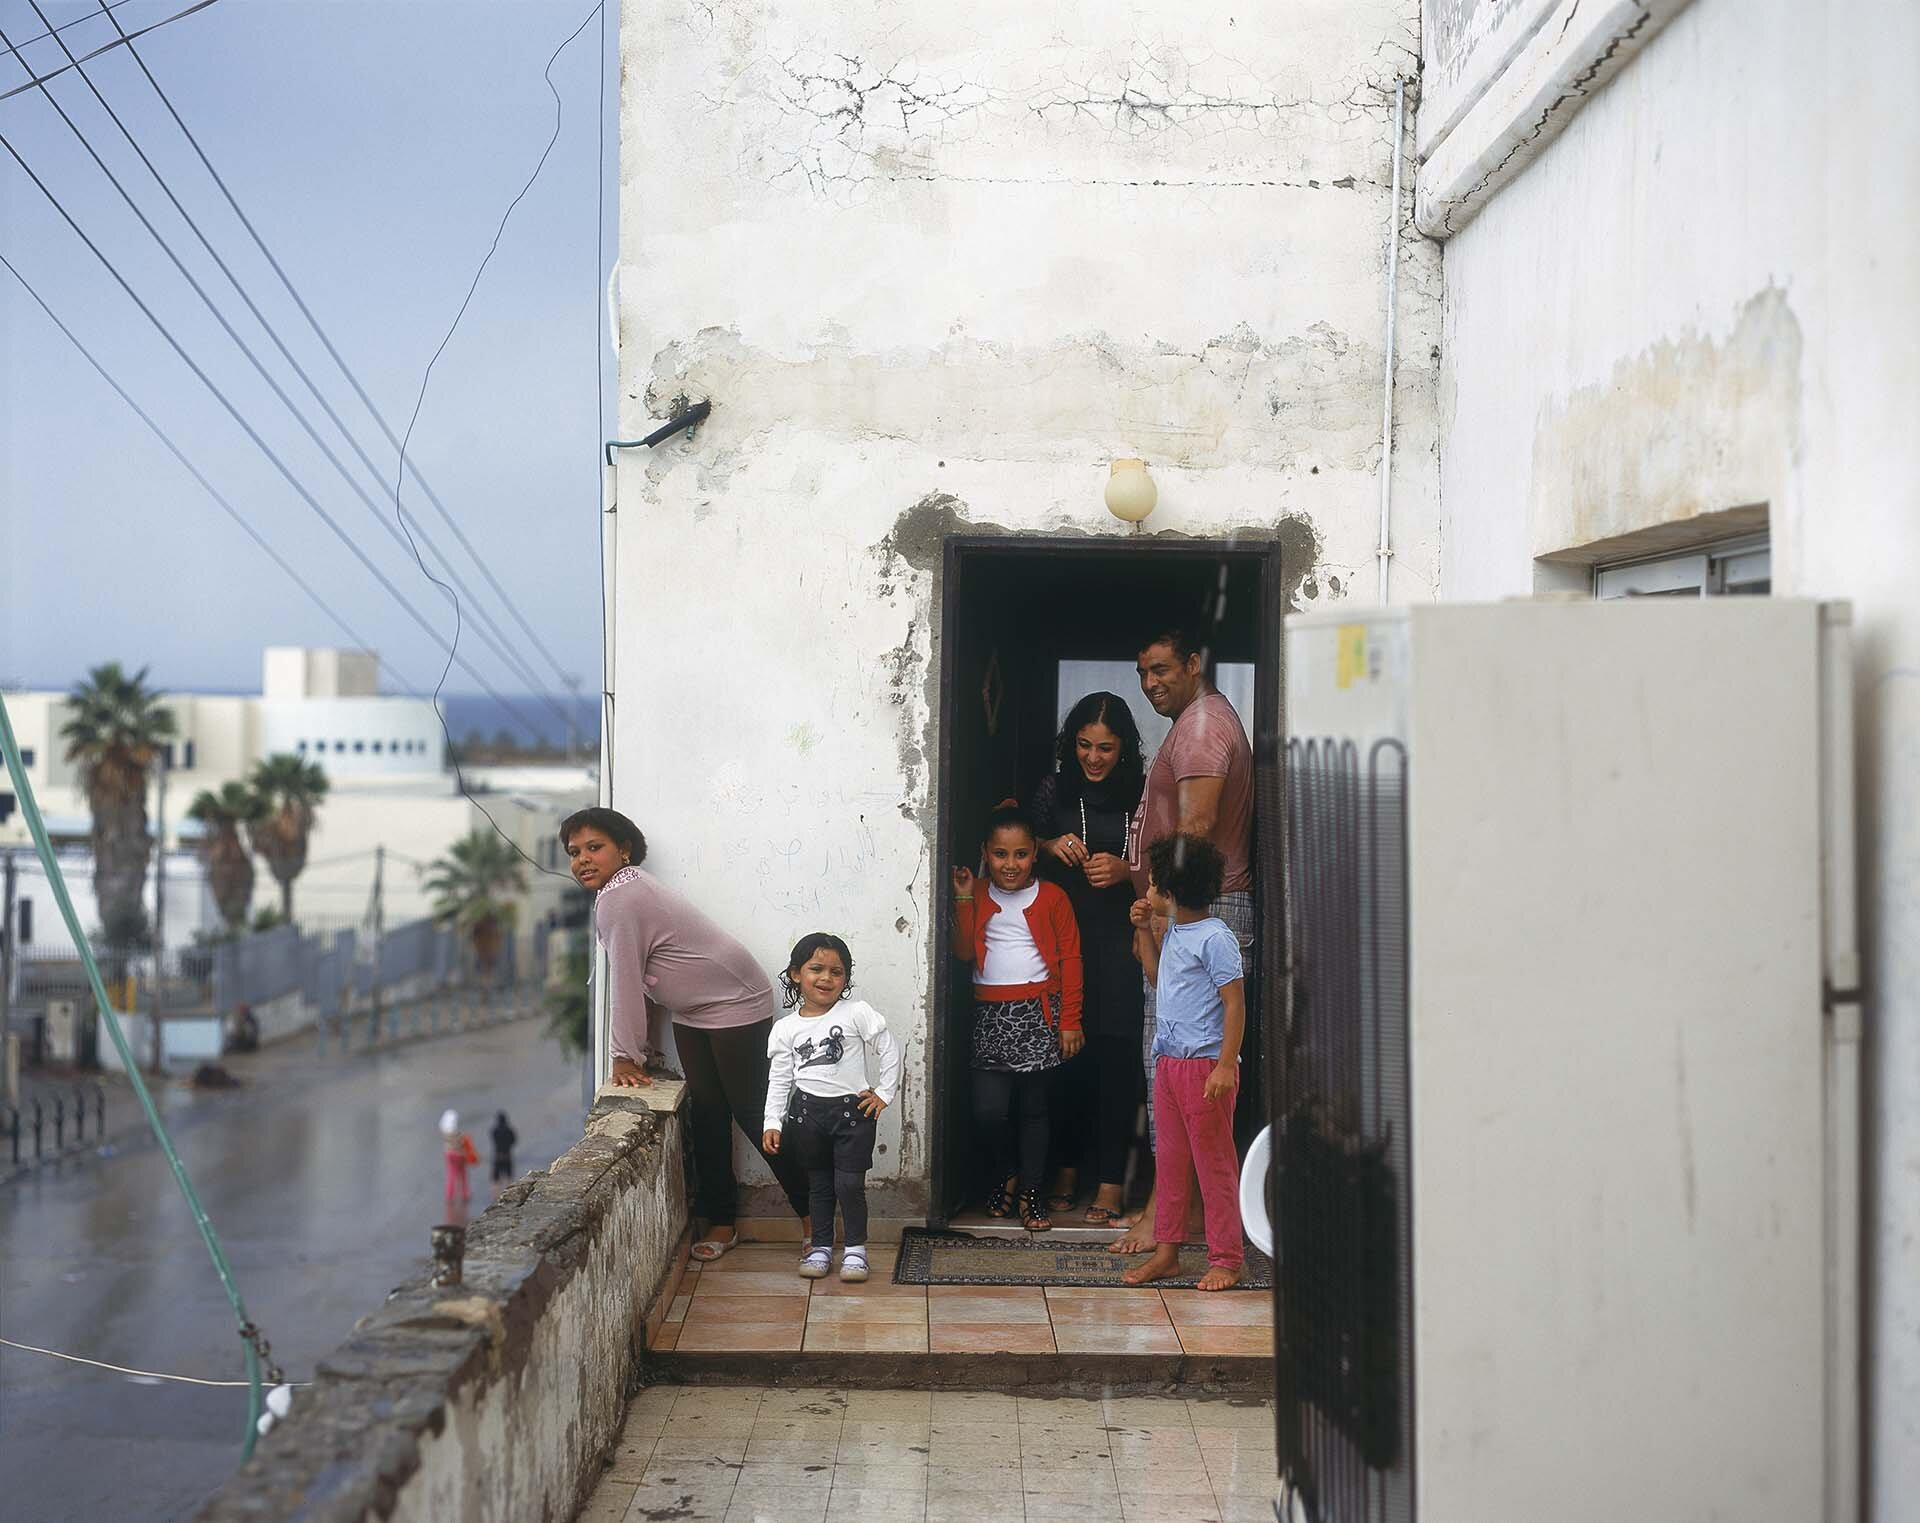 Masaad and His Family, 2012, Inkjet print, 80x100 cm